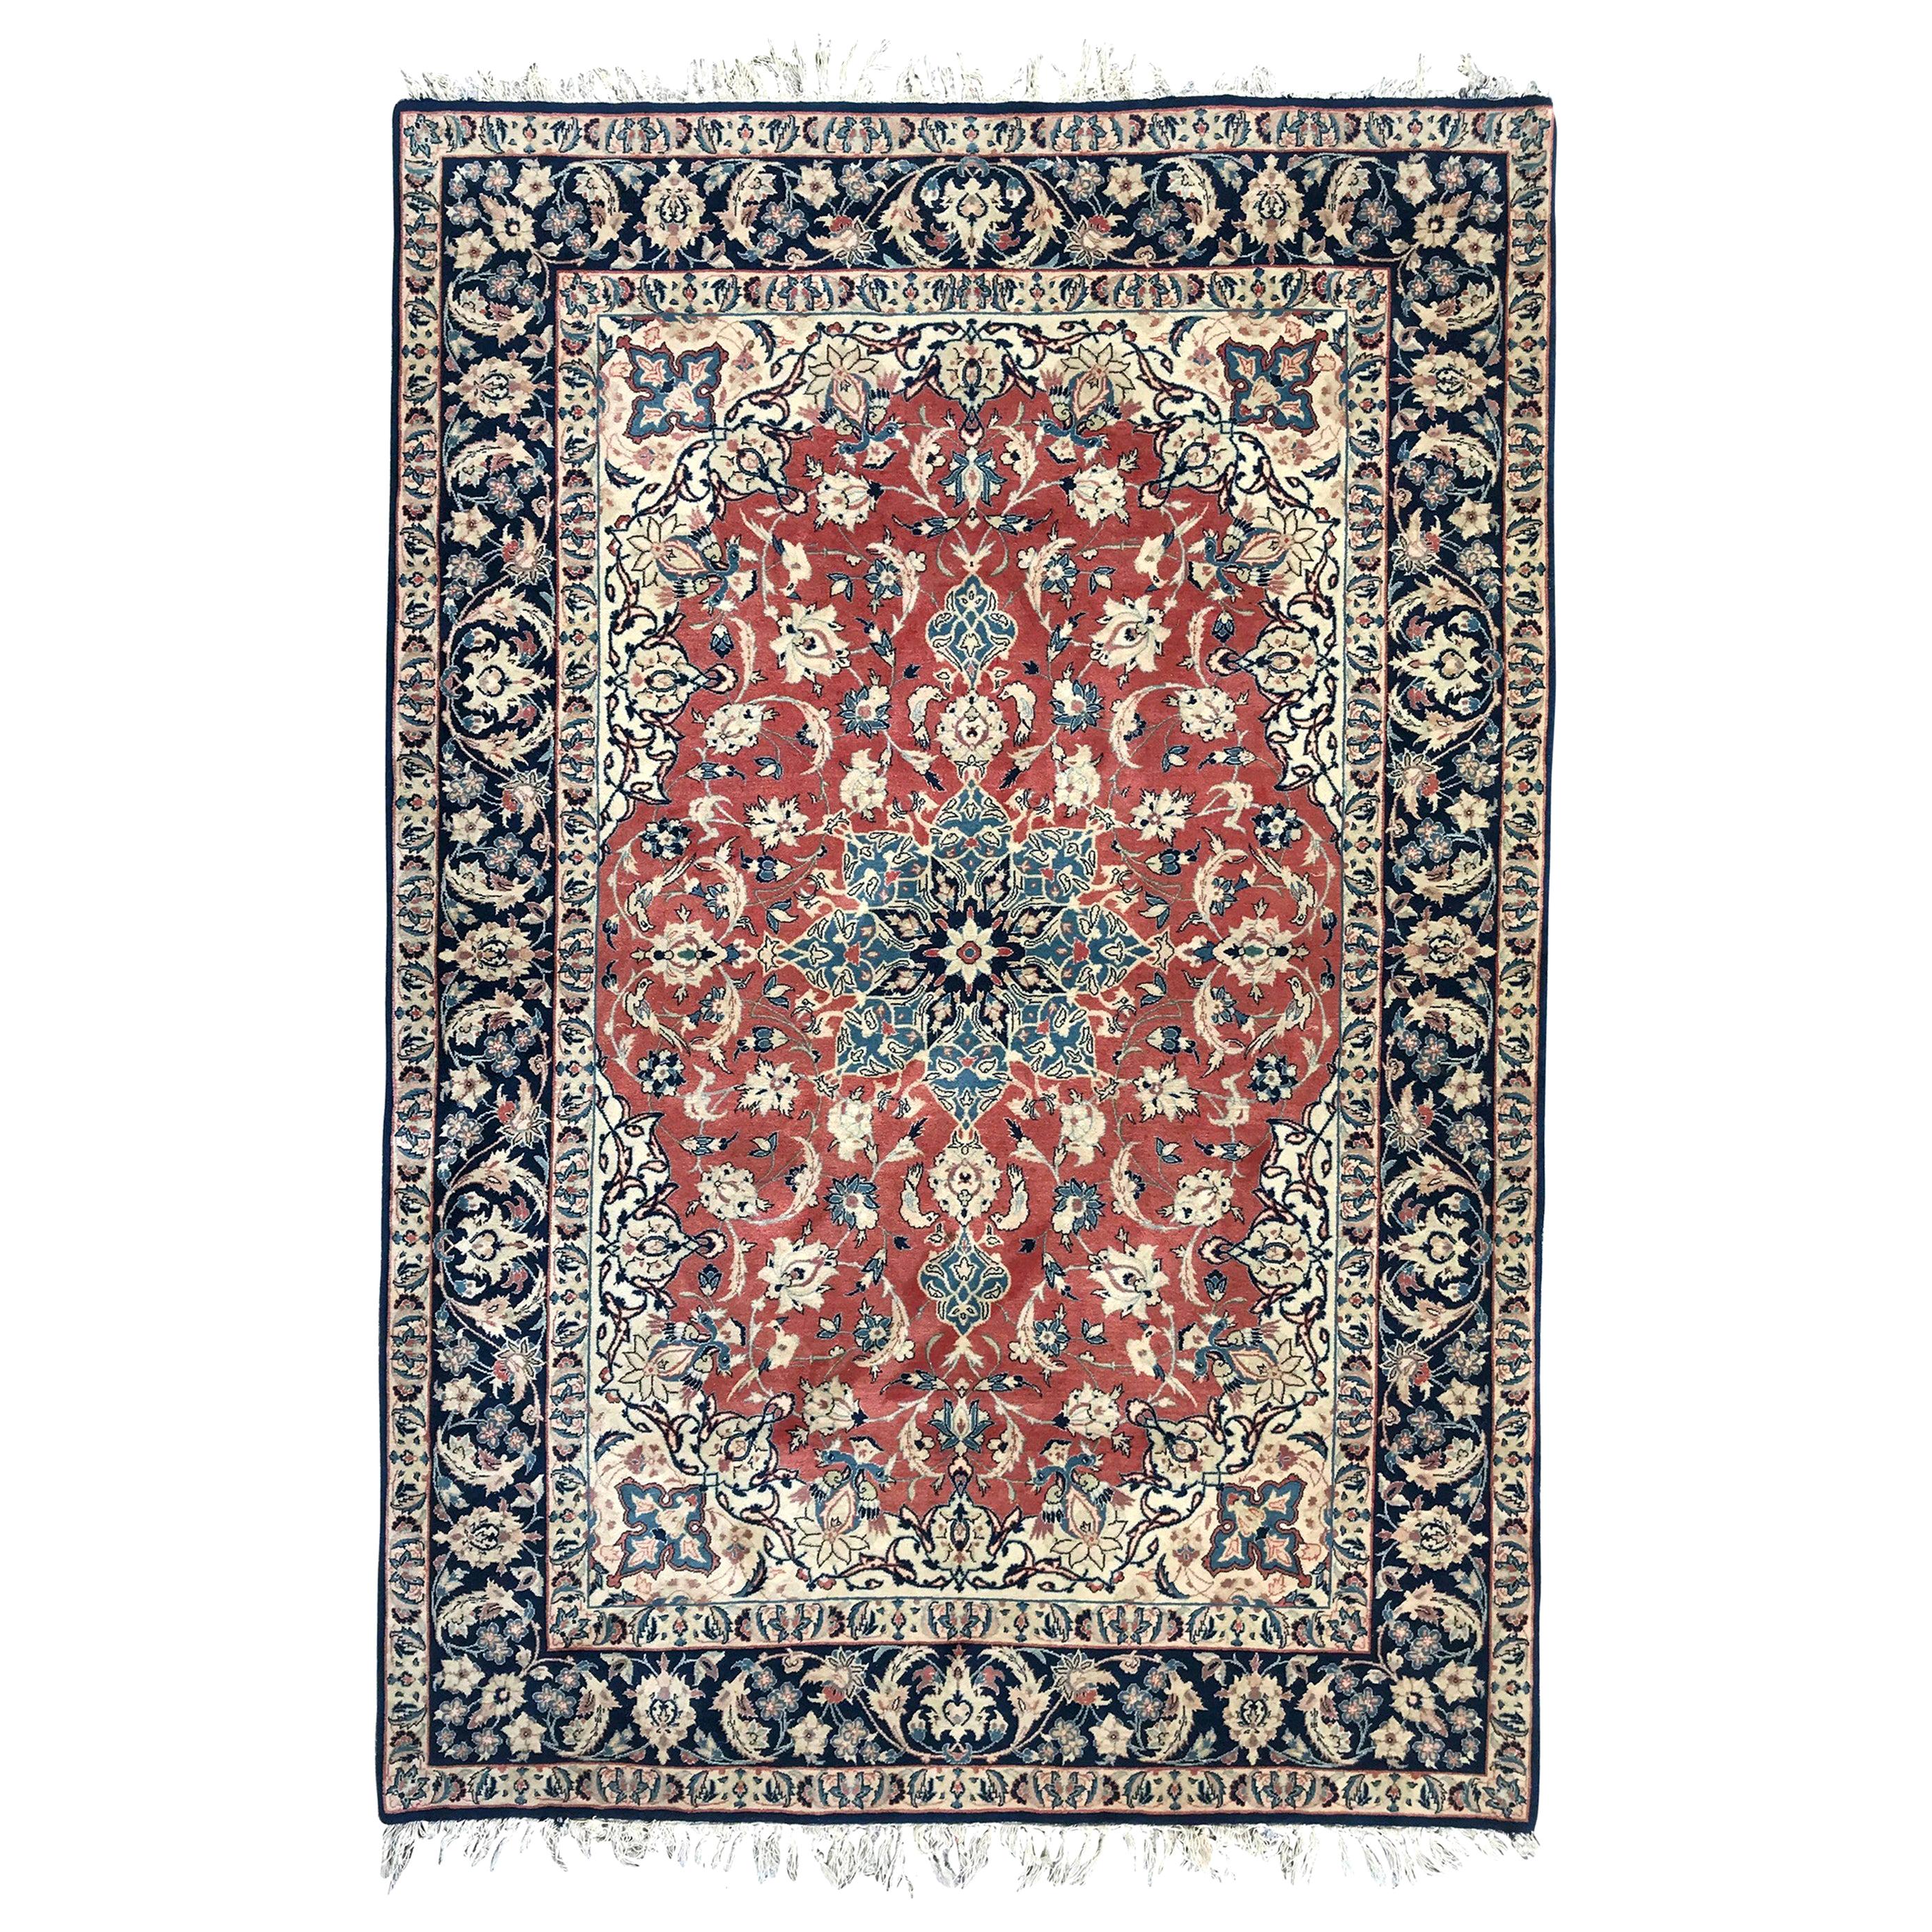 Bobyrug’s Wonderful Very Fine Hand Knotted Isfahan Rug